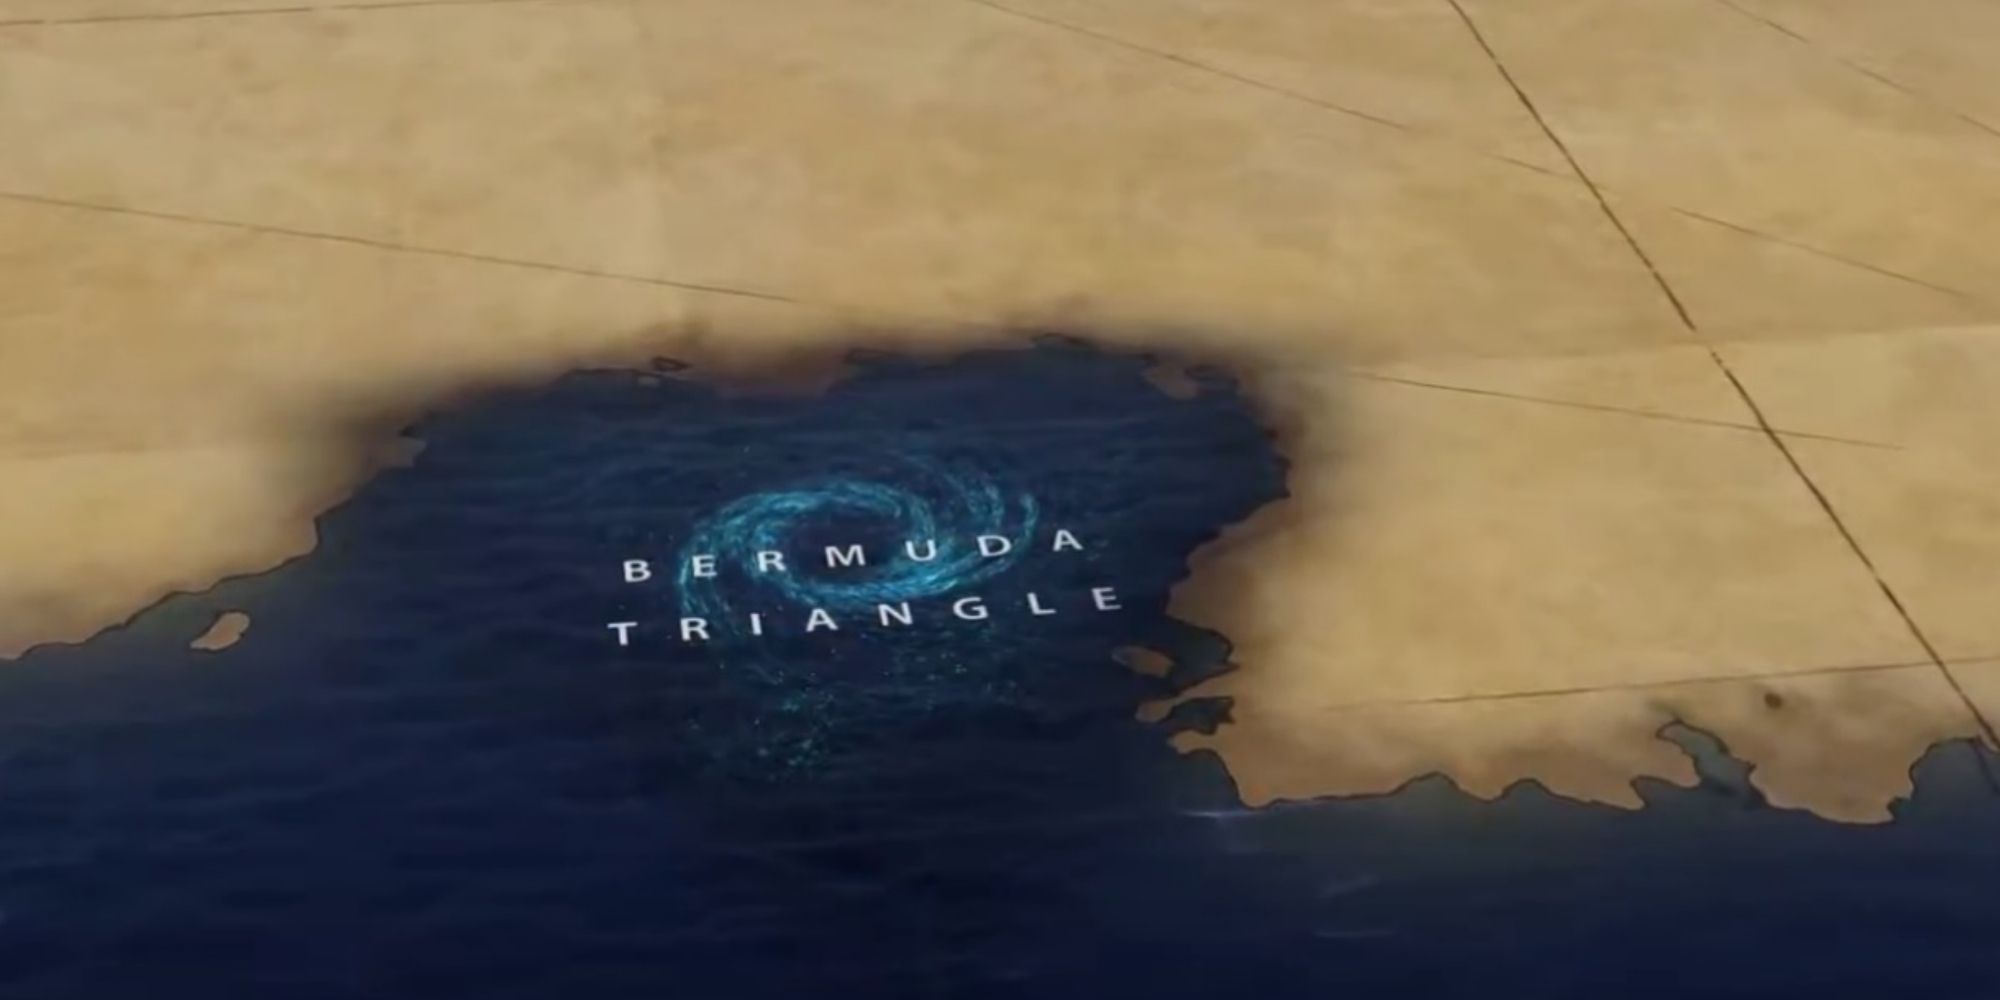 finding the bermuda triangle at the edge of the map